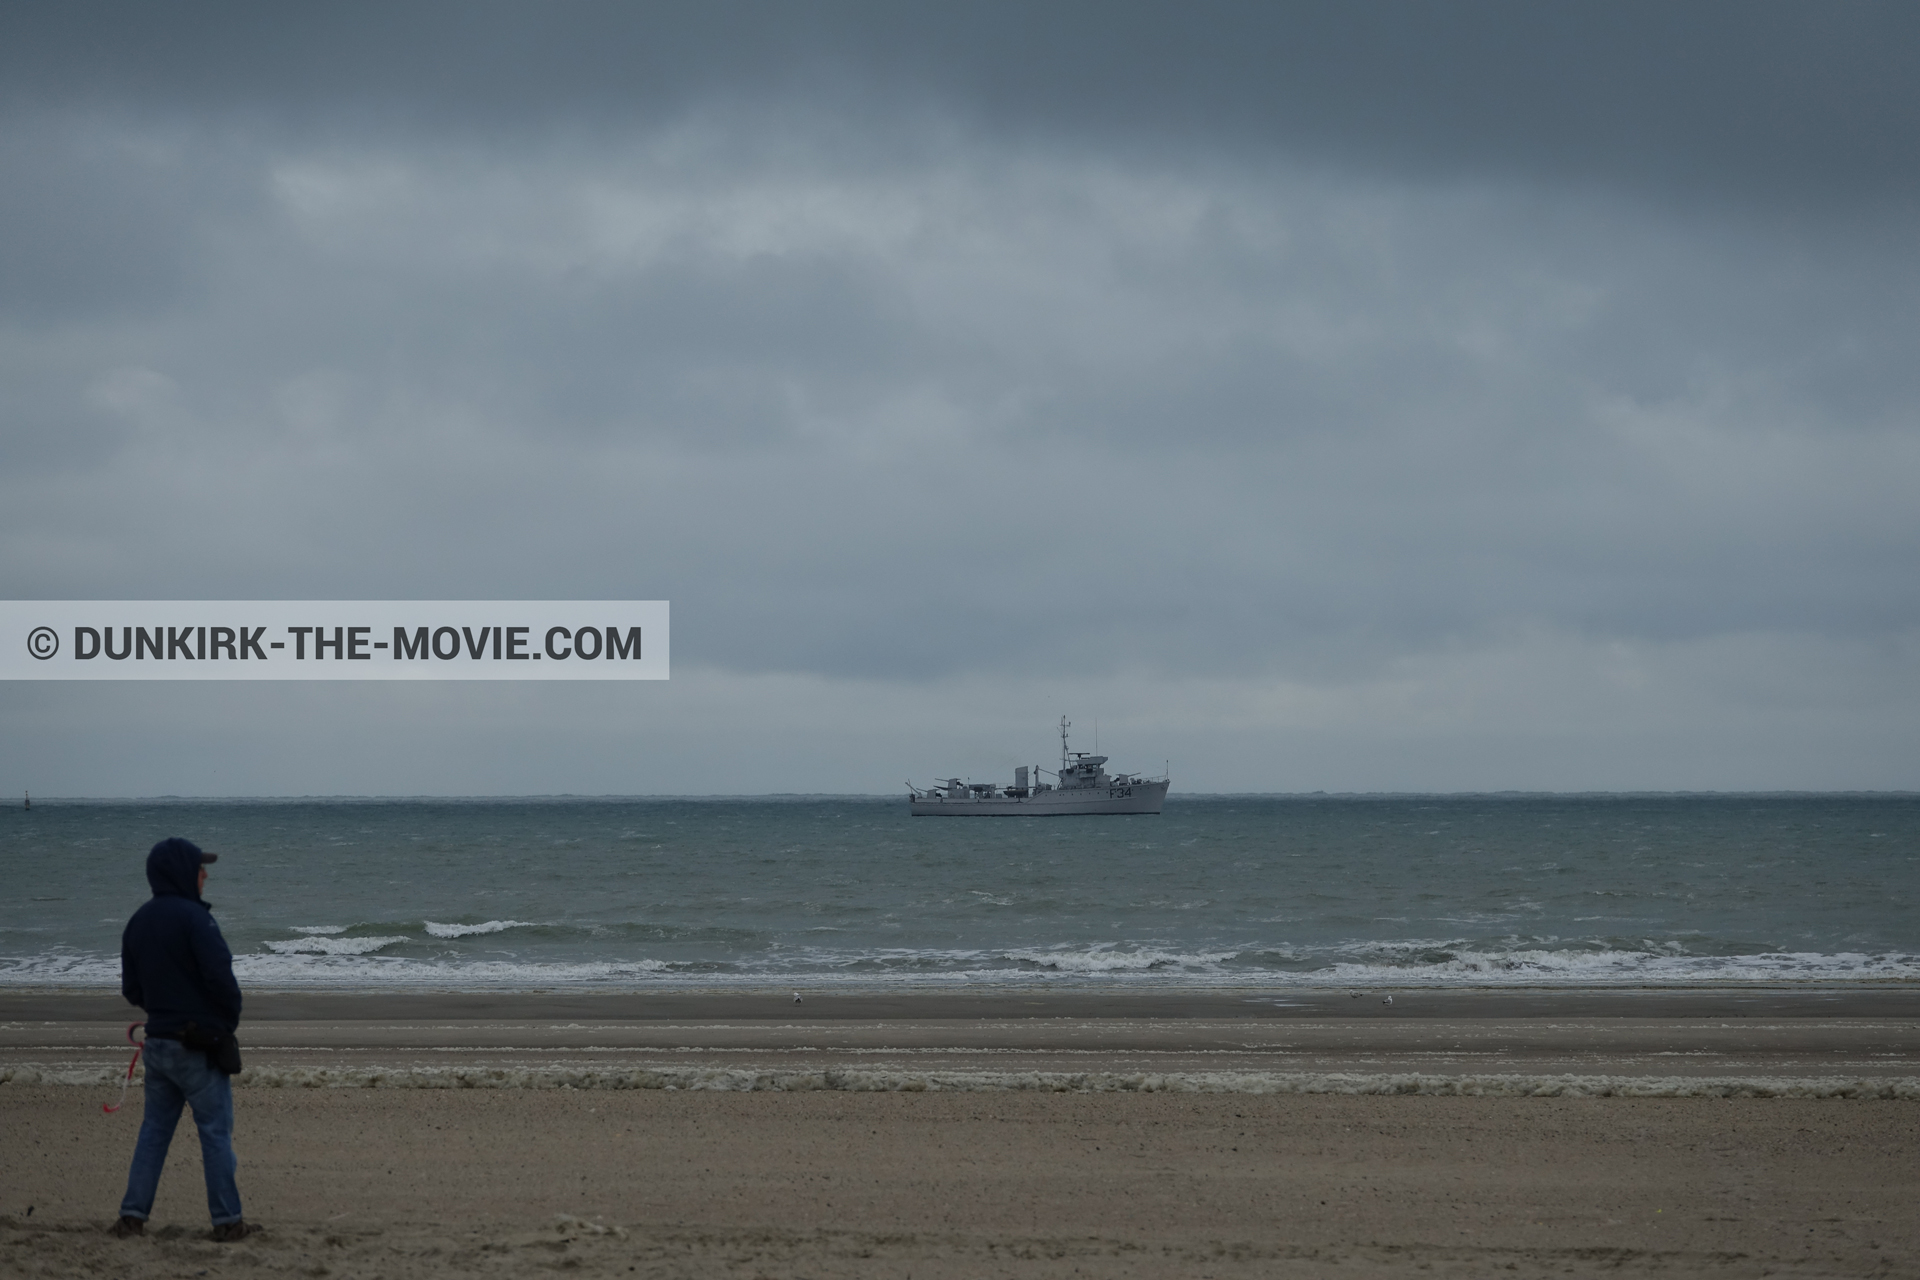 Picture with boat, cloudy sky, F34 - Hr.Ms. Sittard, beach, technical team,  from behind the scene of the Dunkirk movie by Nolan